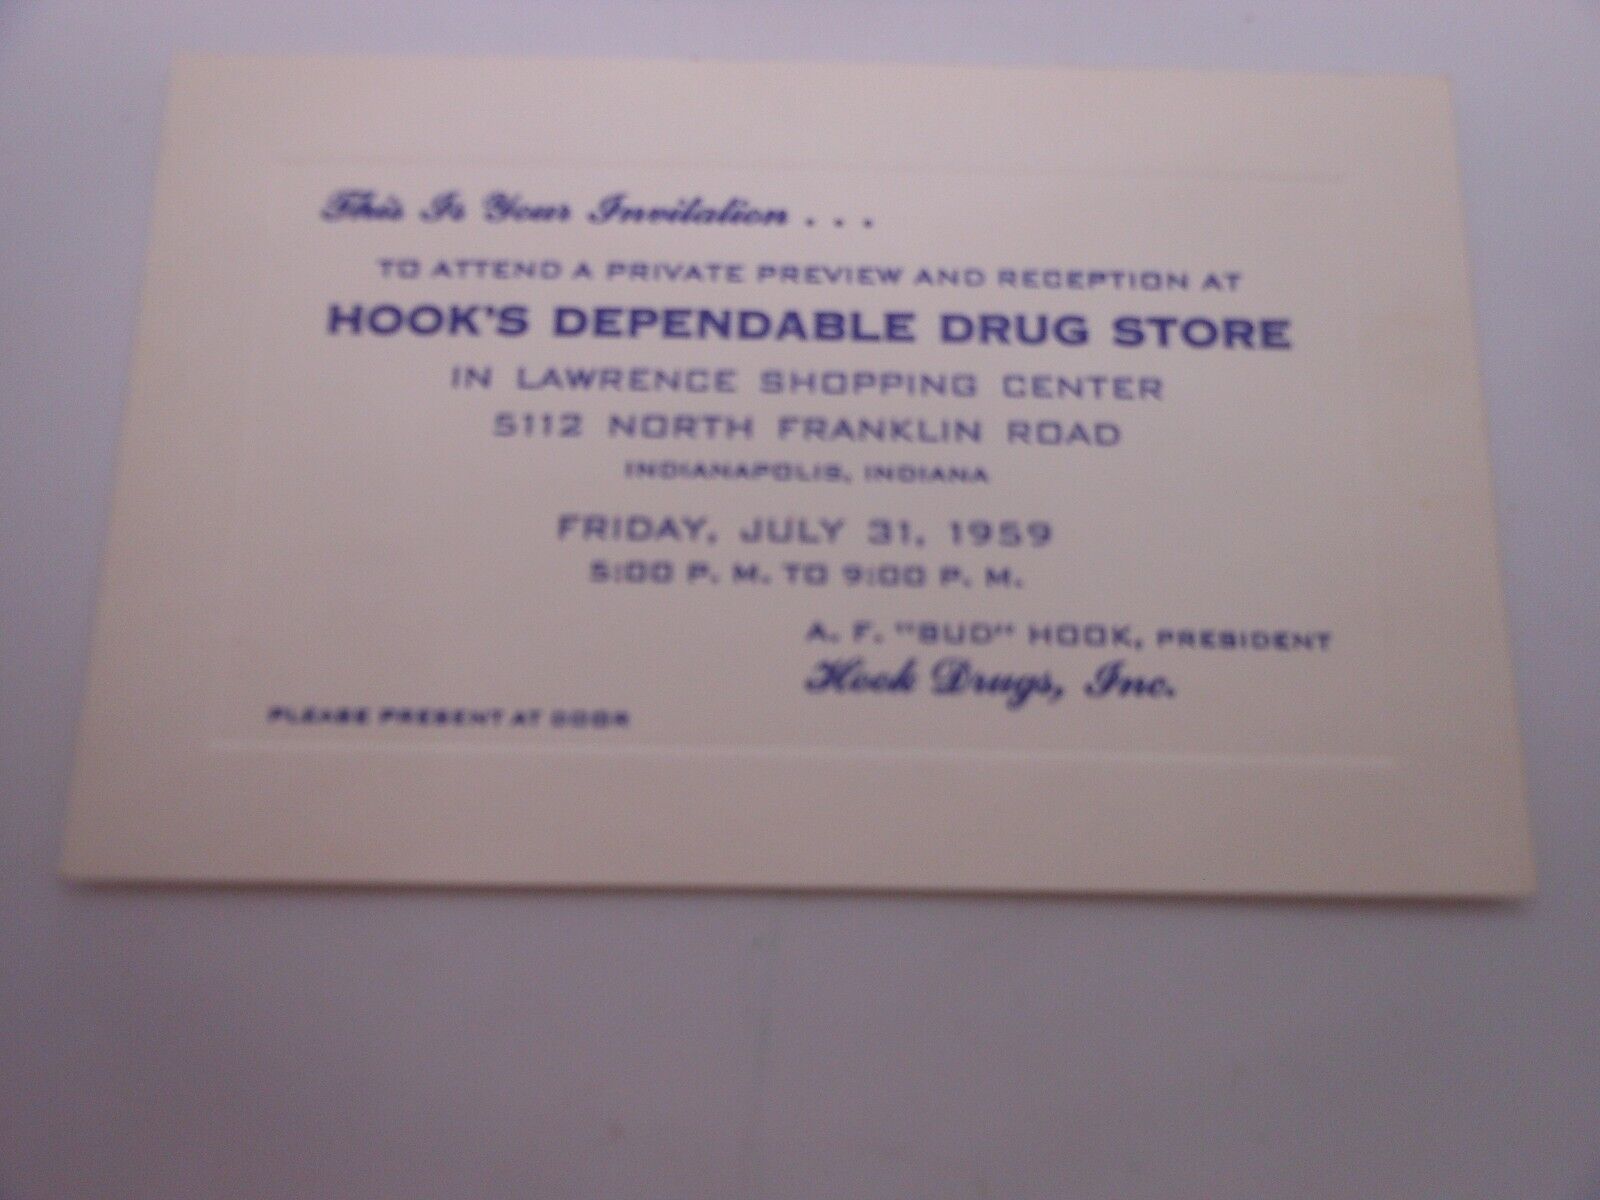 1959 Invitation Hook\'s Dependable Drug Store Private Preview & Reception Indy